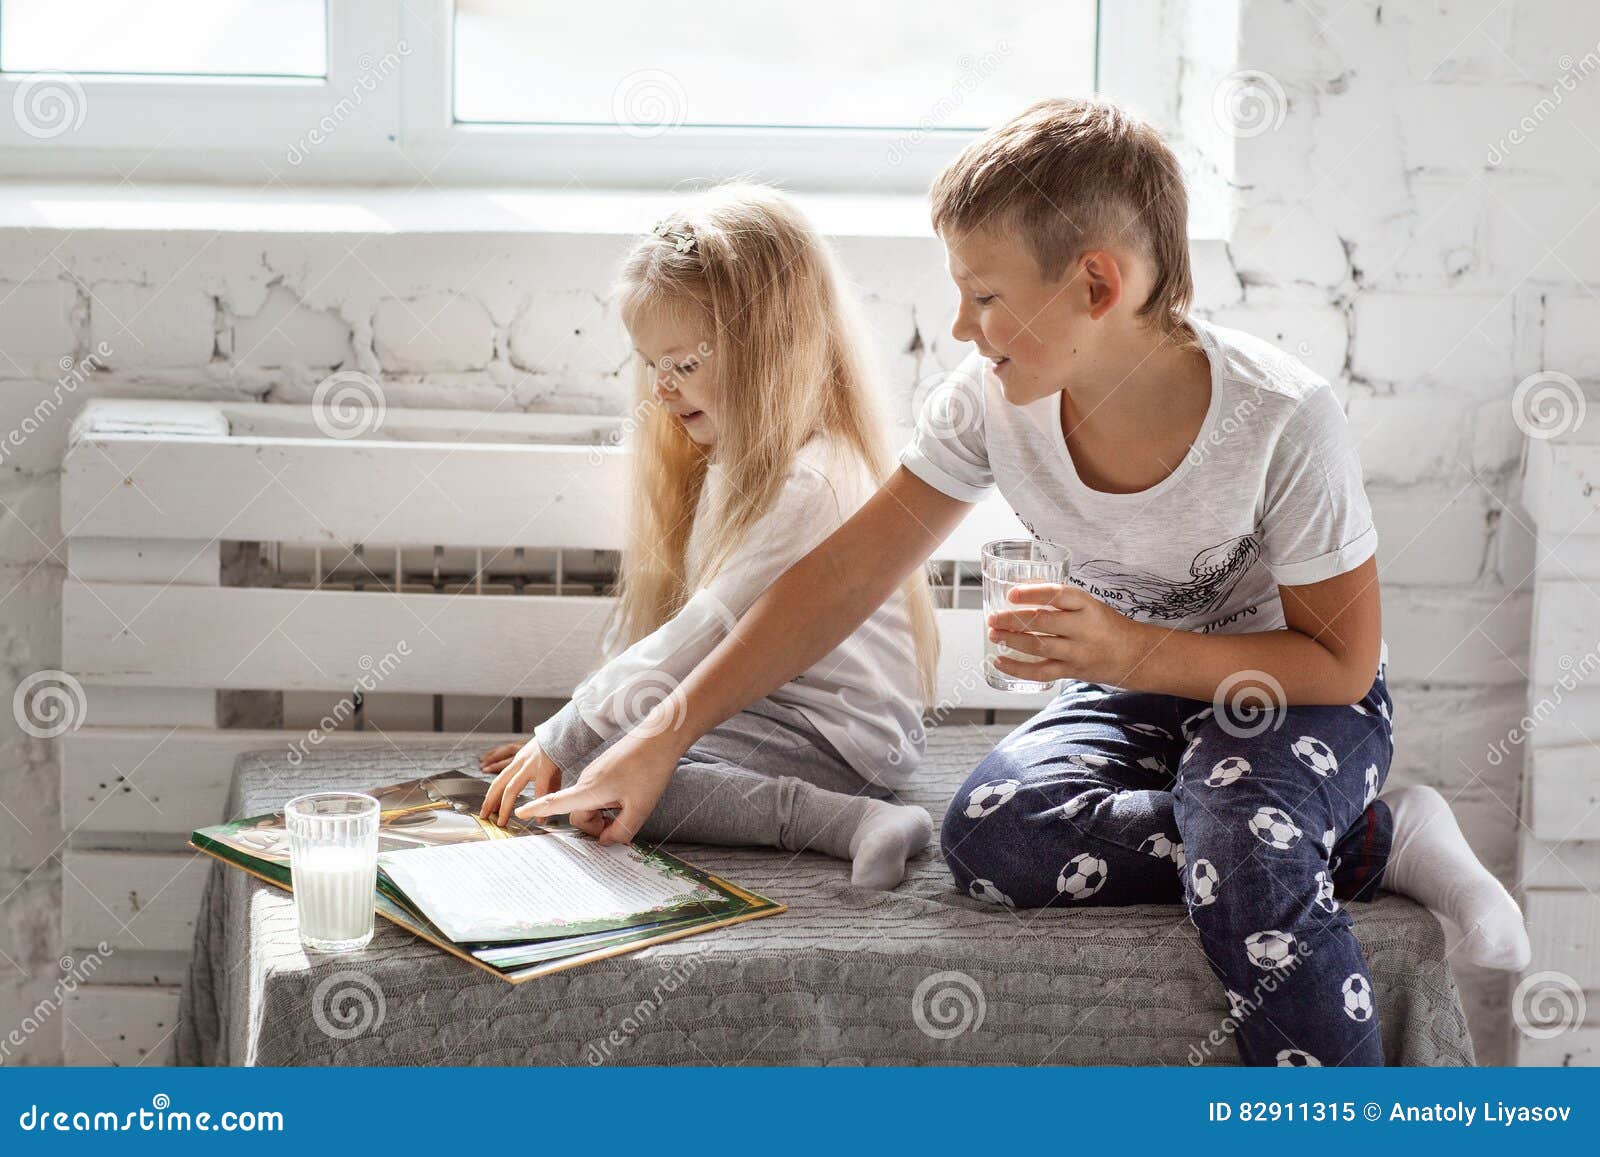 https://thumbs.dreamstime.com/z/children-reading-book-drinking-milk-brother-sister-sitting-drink-watch-82911315.jpg